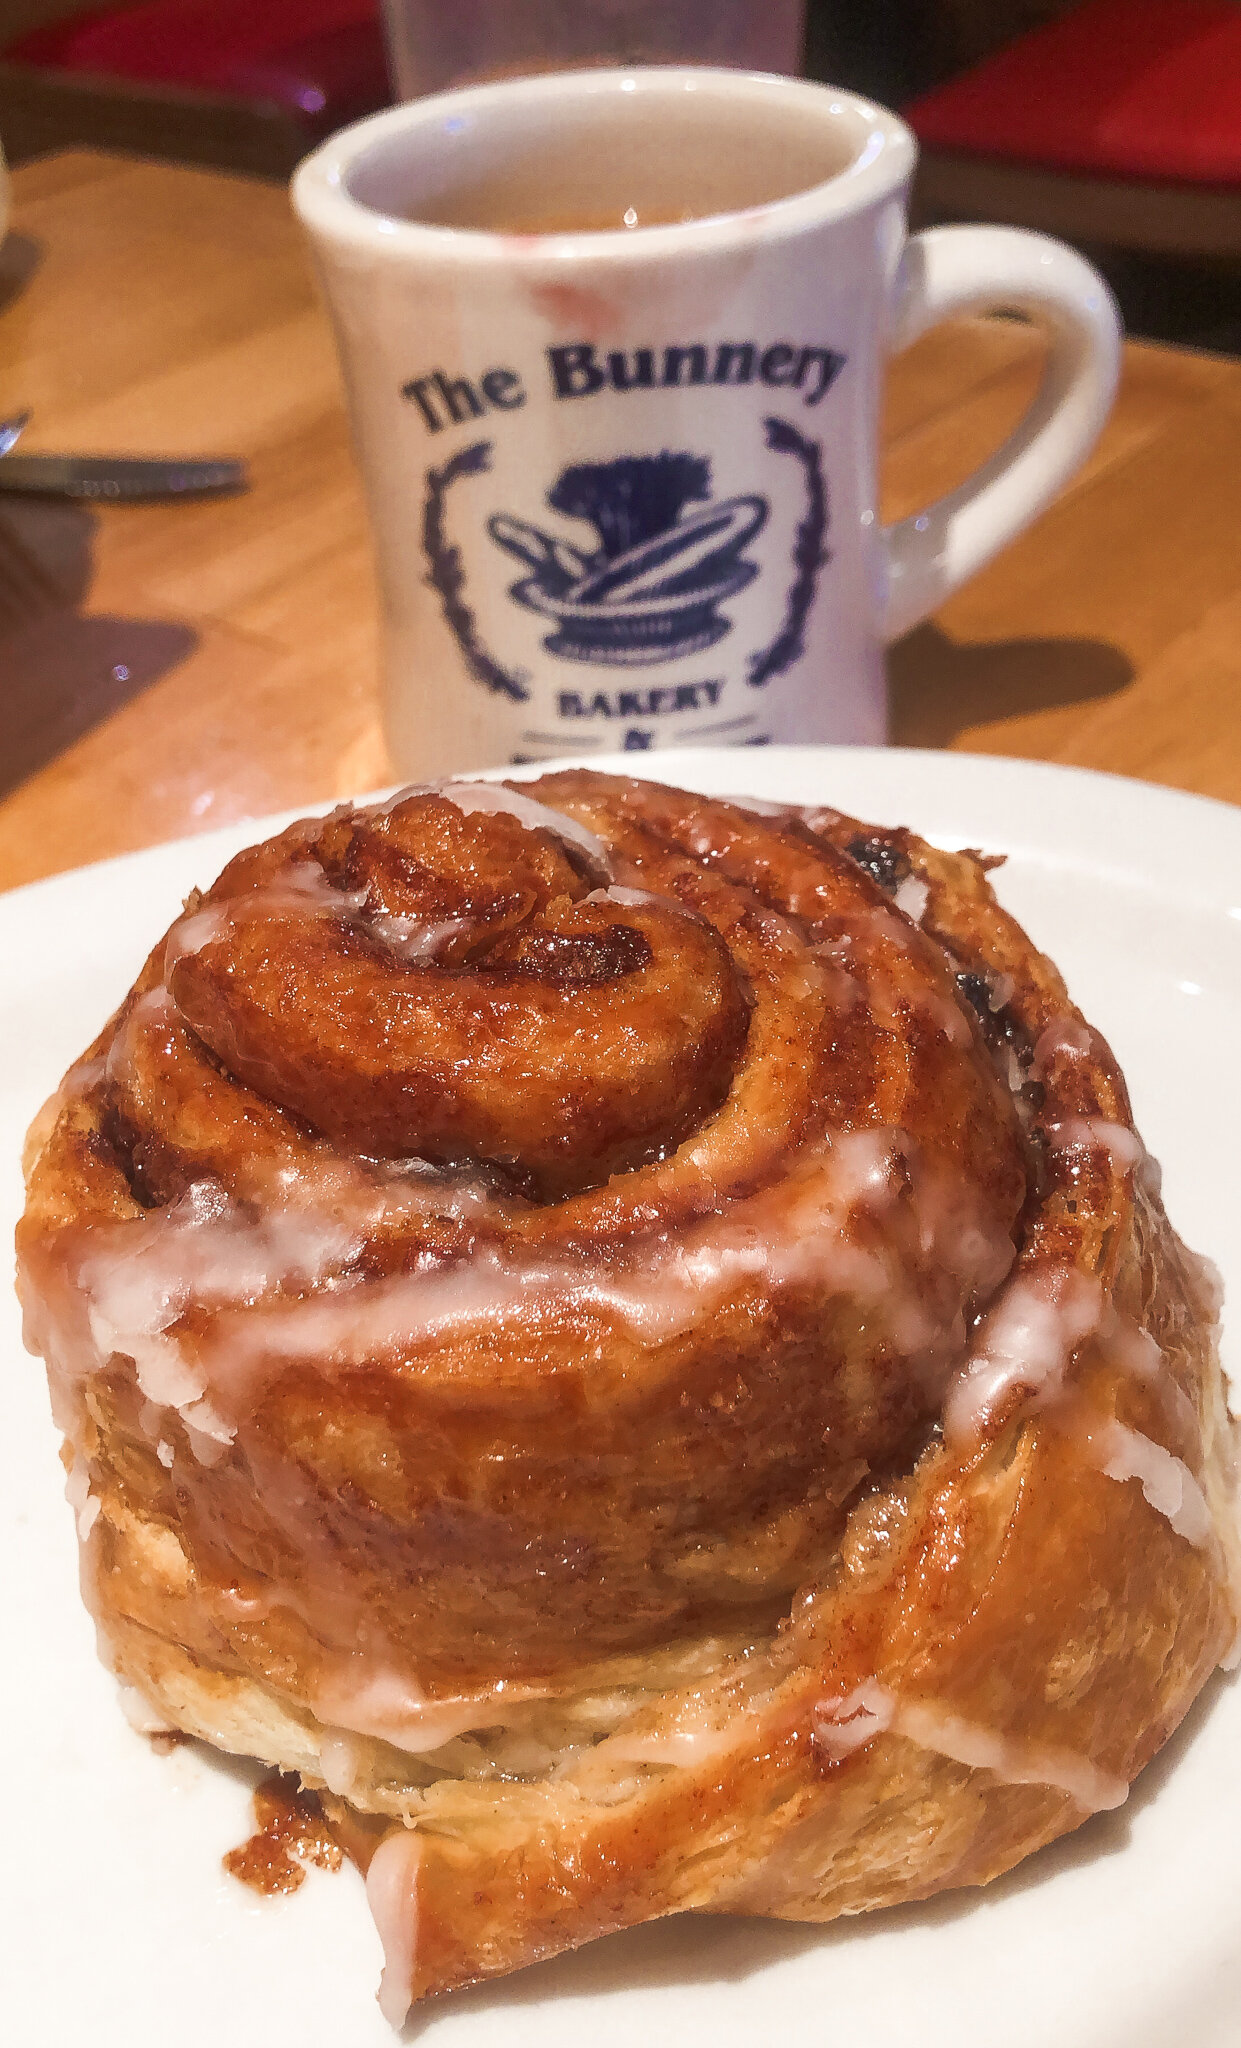  The Bunnery Bakery’s cinnamon roll!!! (And coffee, that I clearly couldn’t wait to take a sip of) 